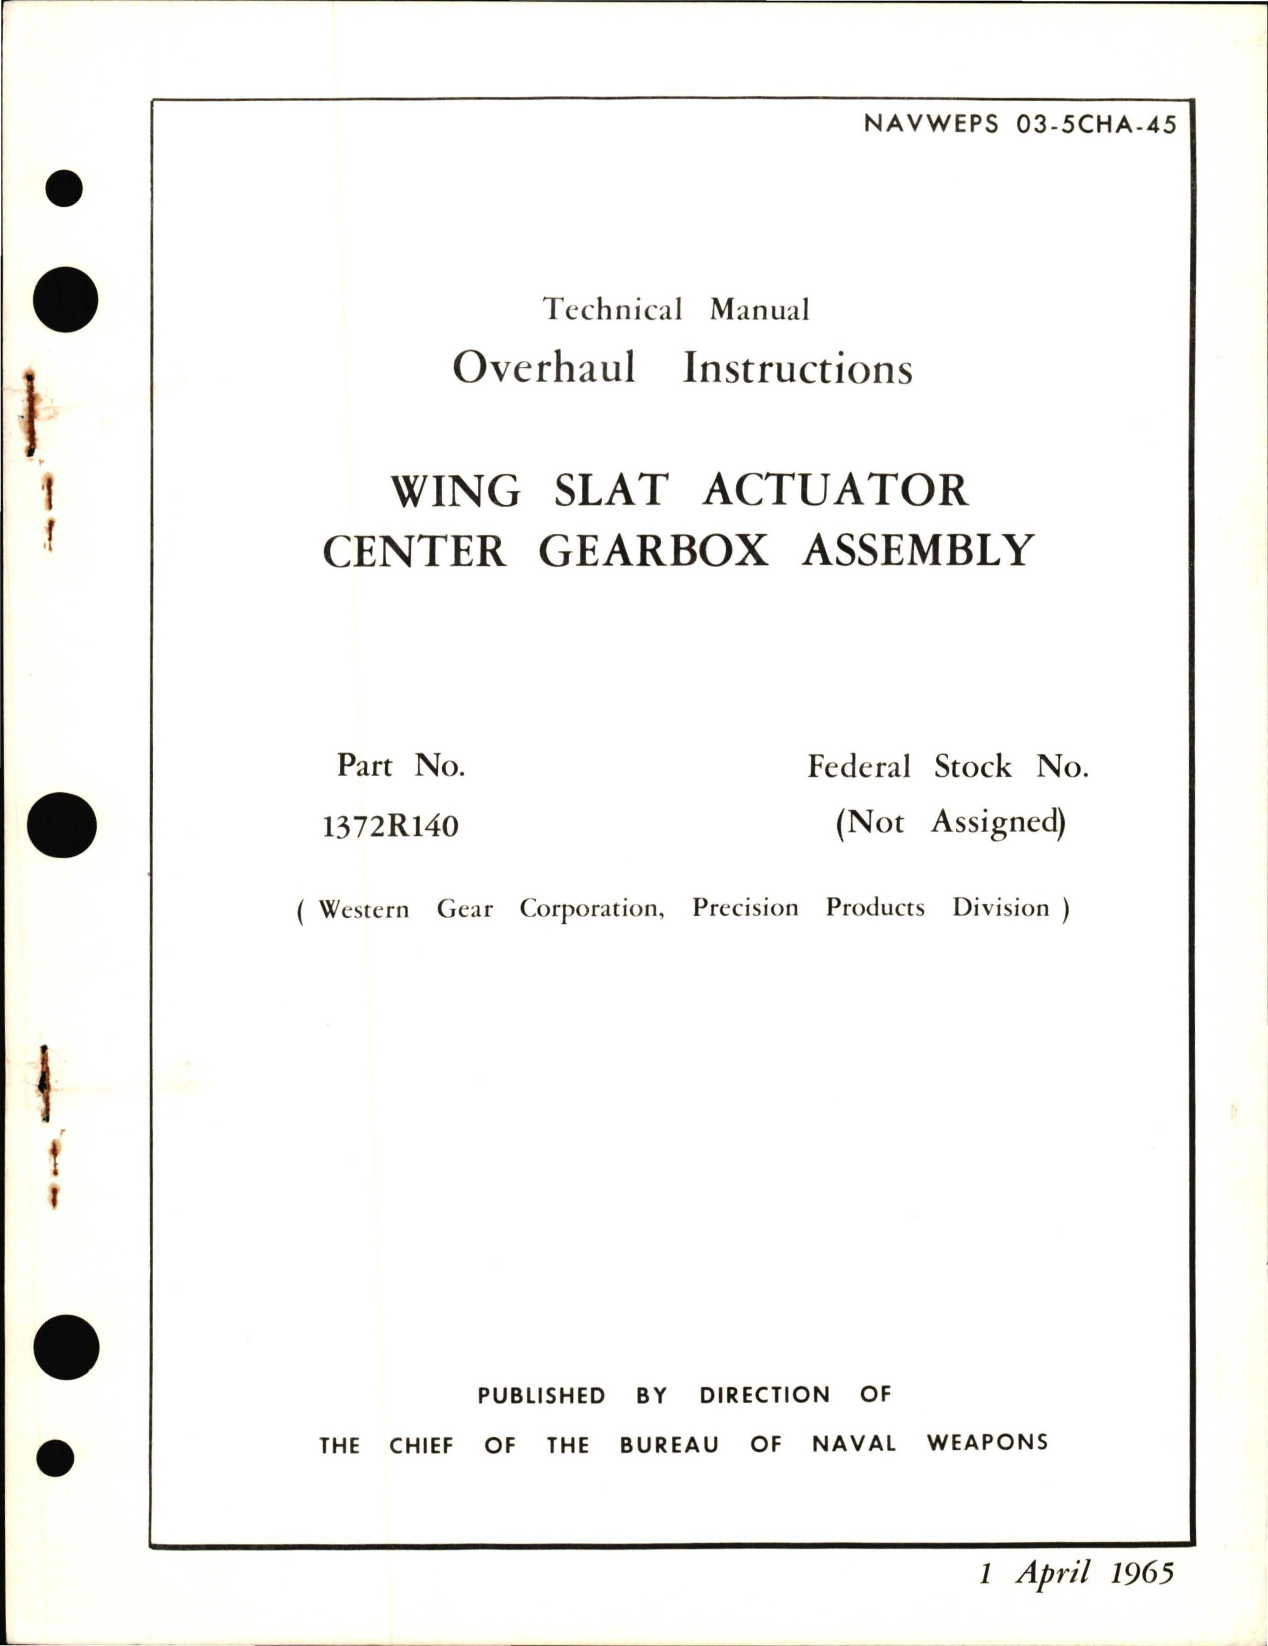 Sample page 1 from AirCorps Library document: Overhaul Instructions for Wing Slat Actuator Center Gearbox Assembly - Part 1372R140 